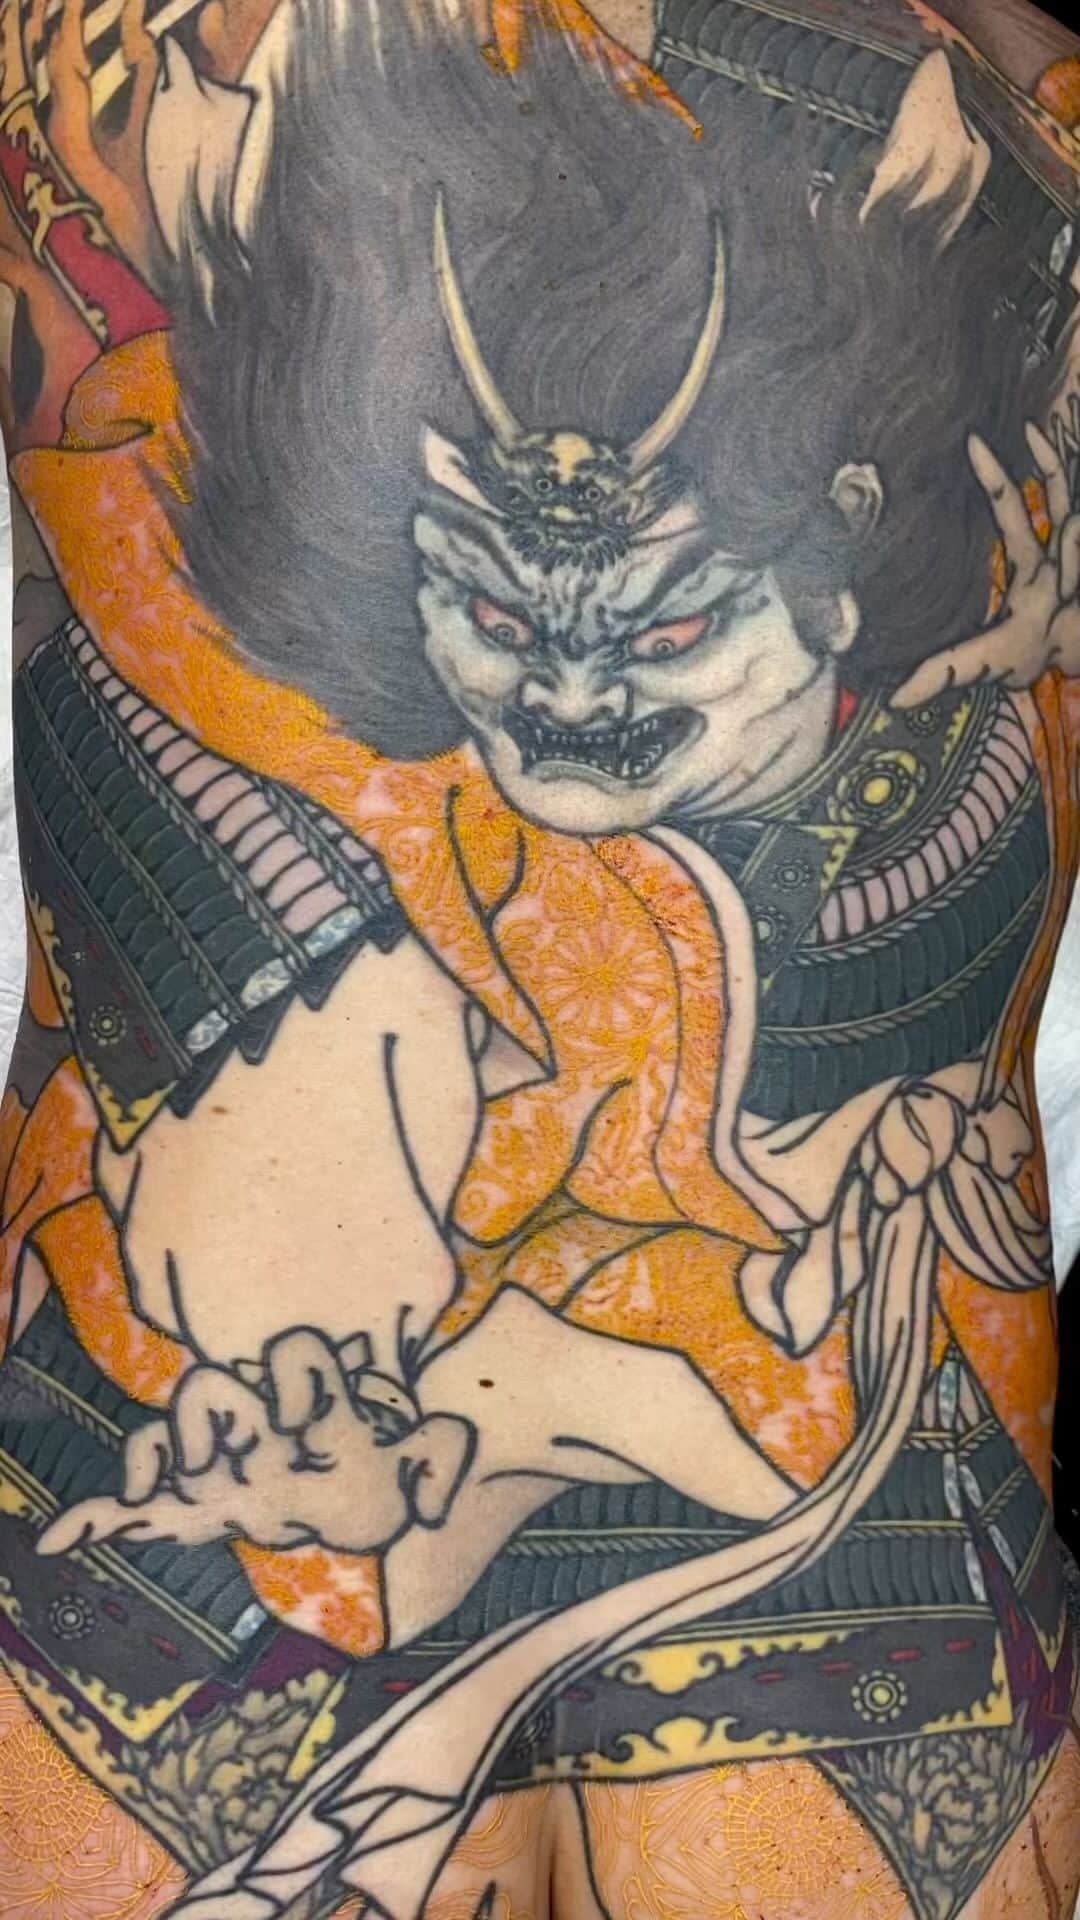 SHIGEのインスタグラム：「New beginning,, “Minamotono Yoshihira” It was started about 10 years ago,, Started new lines for 2 days in a row,, Thank you @nickedwards_tattoo Otsukaresama deshita!  #shige #shigetattoo #shigeyellowblaze #yellowblazetattoo #黄炎 #悪源太 #源義平 #日本刺青 #japanesetattoo #japaneseart @bishoprotary #bishoprotary #bishopfamily @inkeeze #inkeeze #dipcaps @dipcaps @davincineedles @fusionink #fusionink #fusioninkproteam」